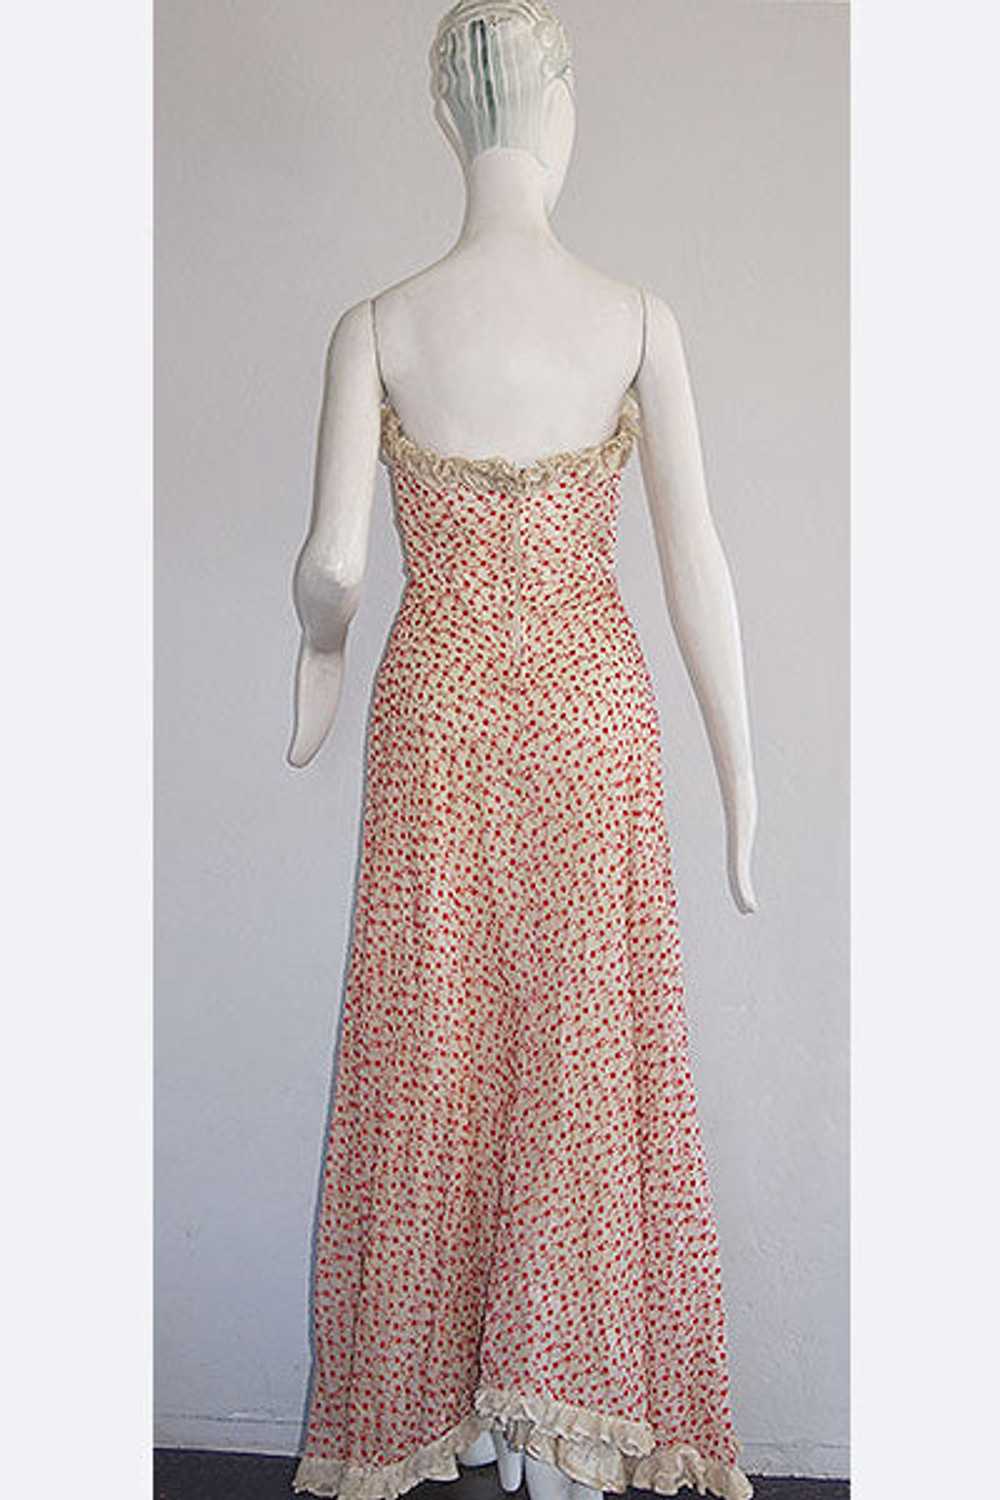 1940s Embroidered Party Dress - image 2